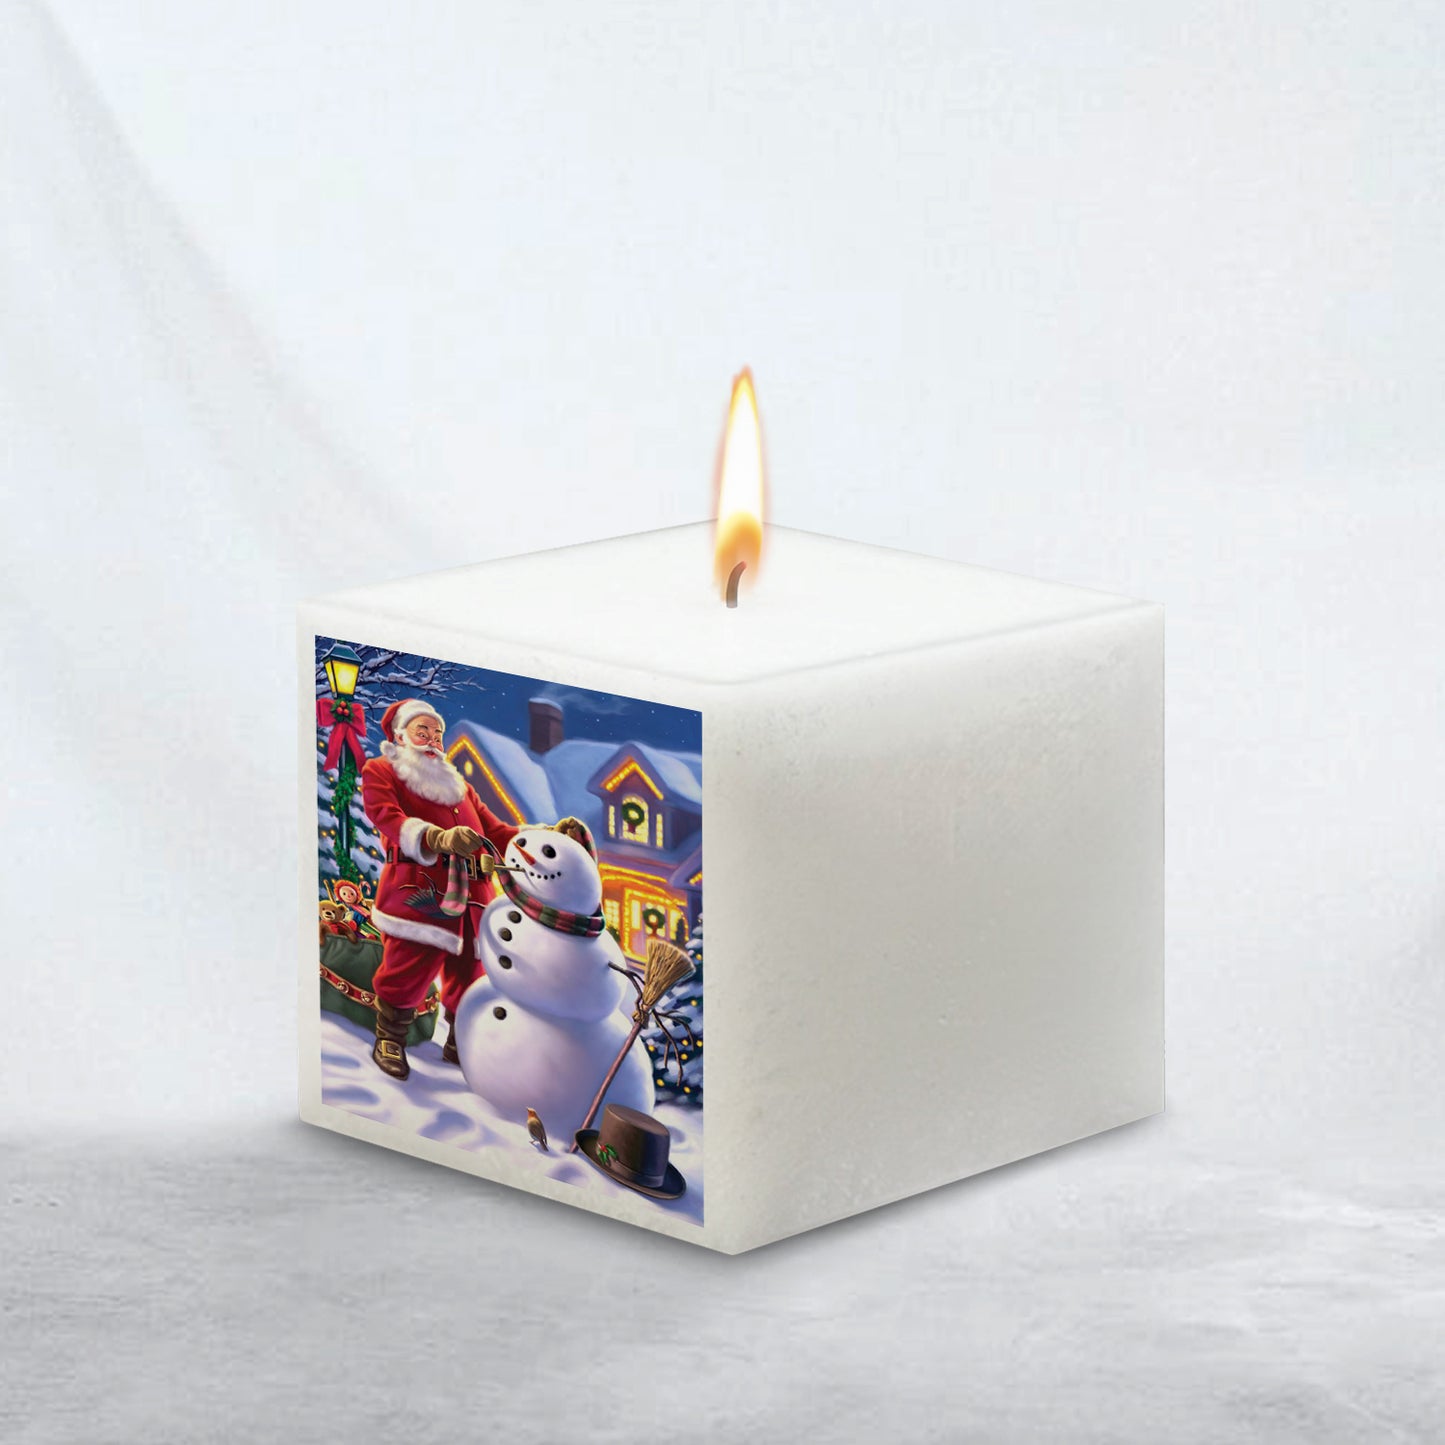 AuraDecor Square Christmas Candle ( 3*3*3 Inch ) Unscented